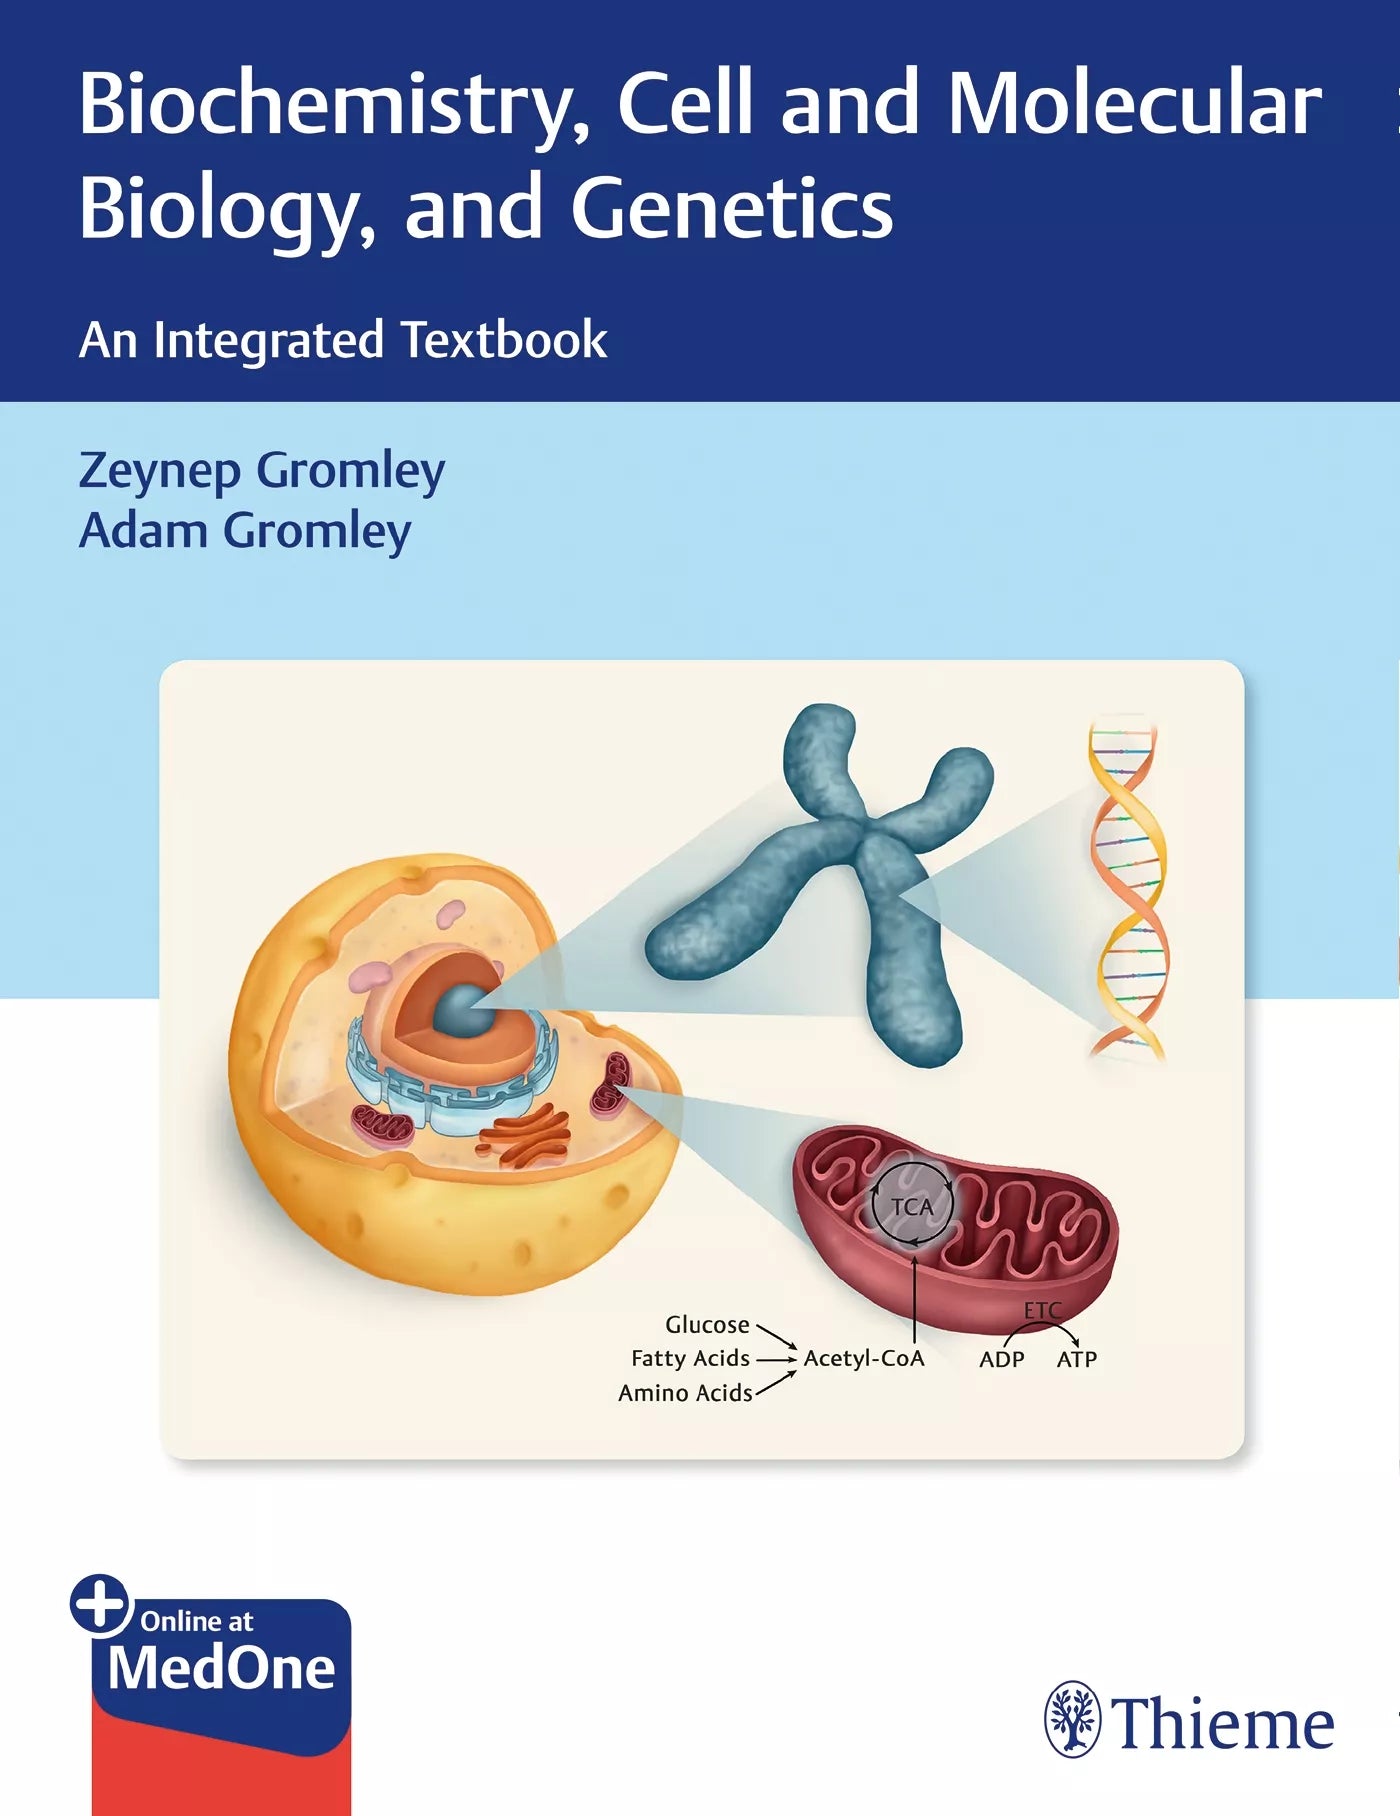 Biochemistry, Cell and Molecular Biology, and Genetics. An Integrated Textbook